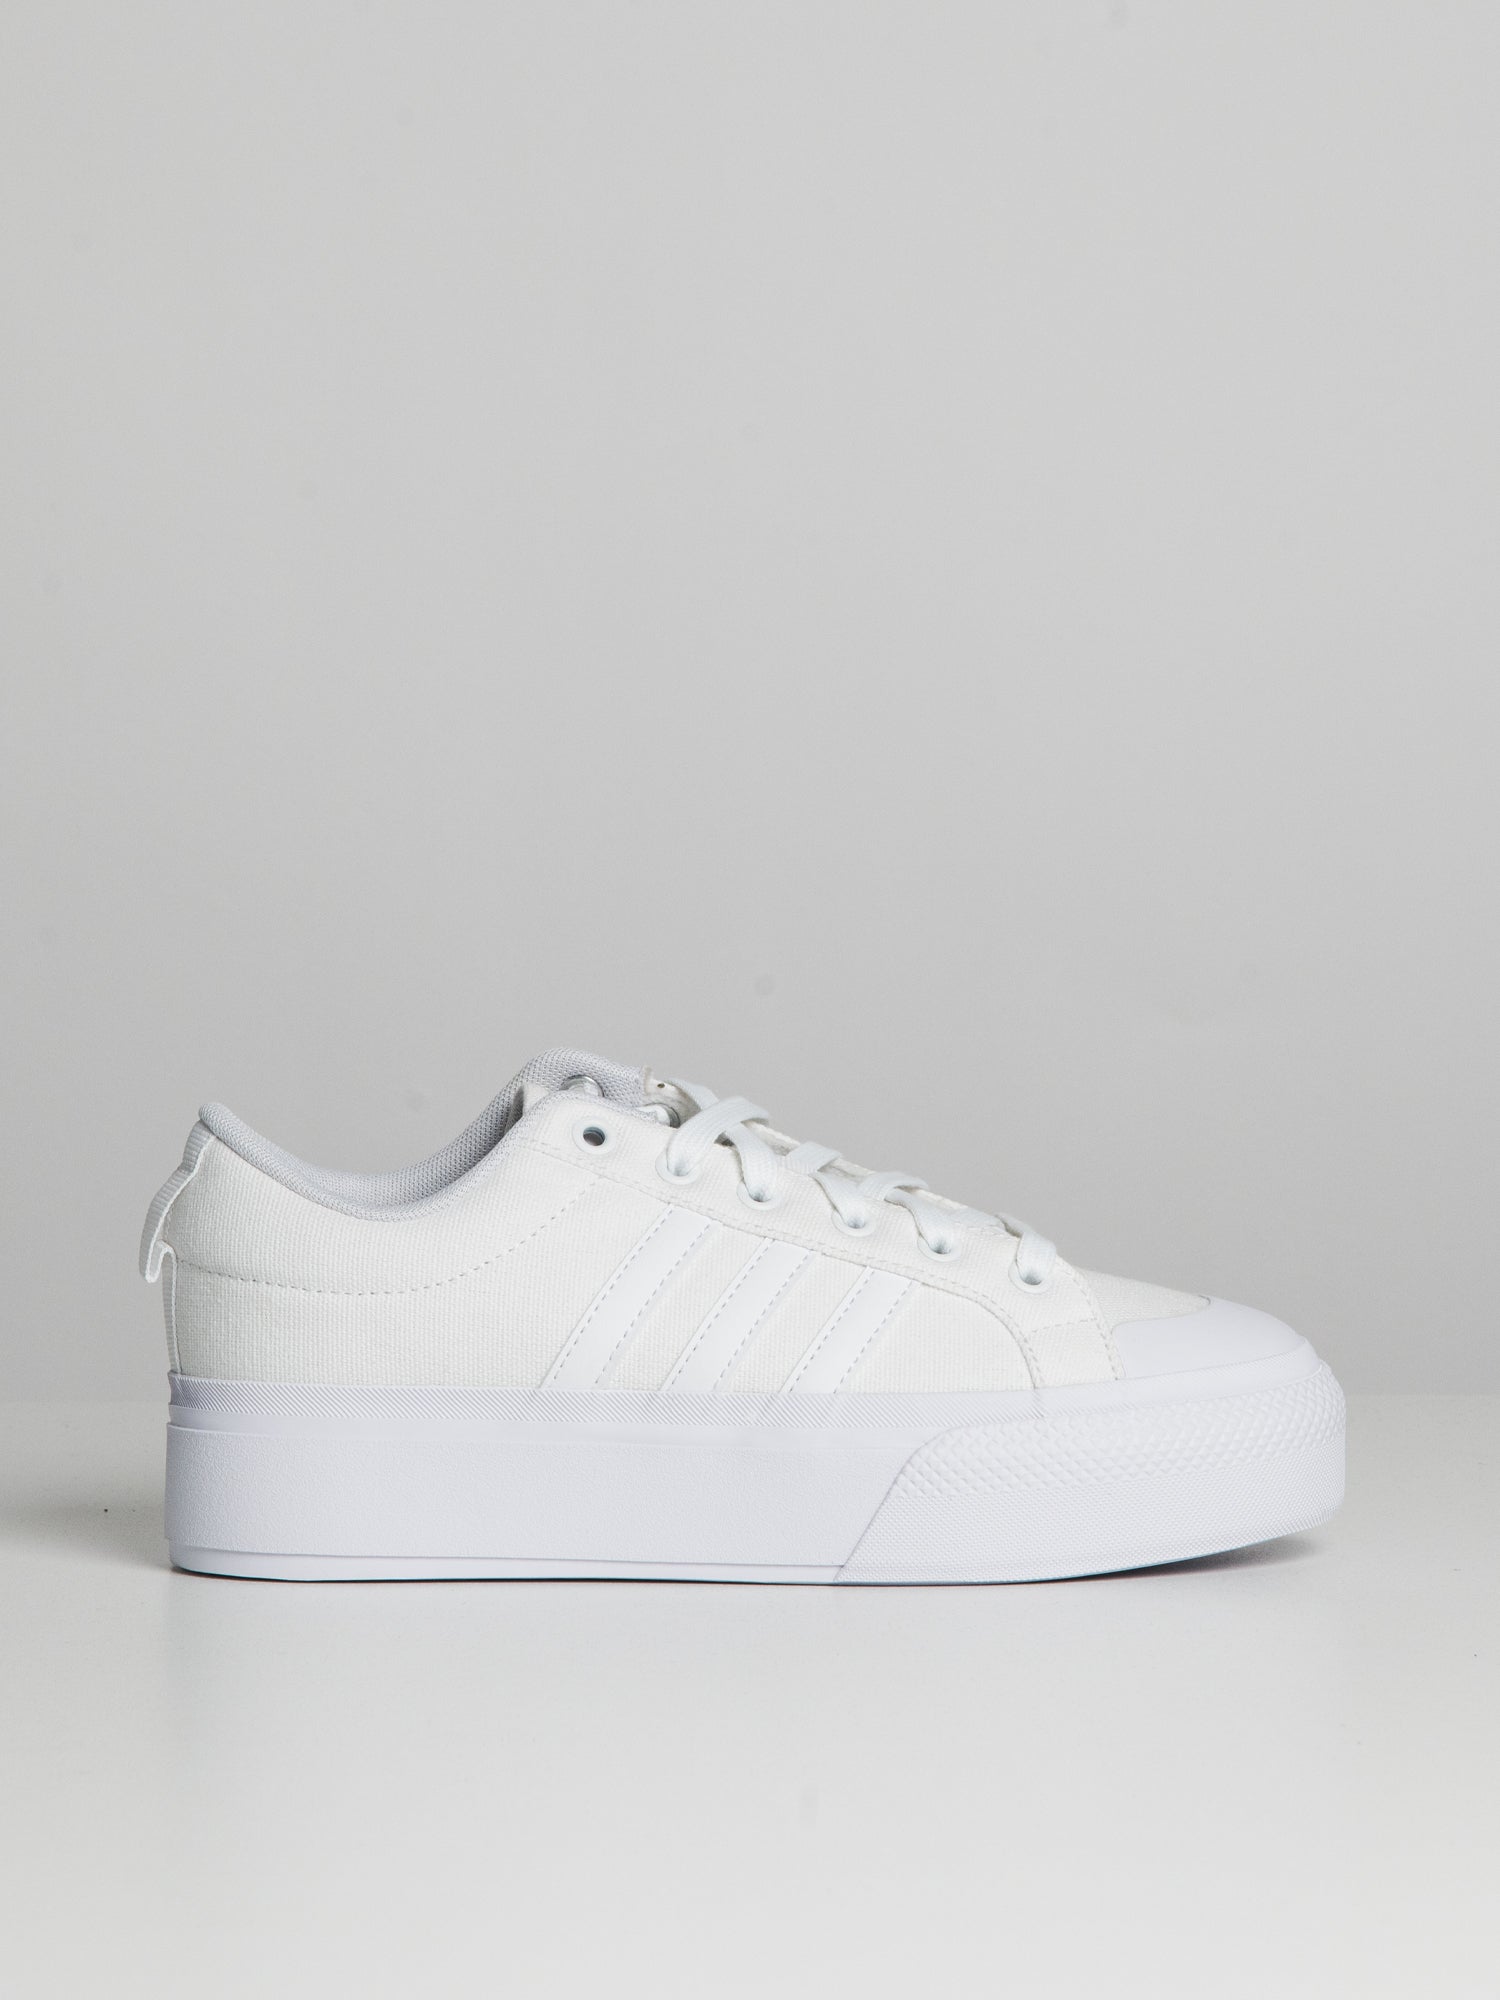 adidas, Shoes, Adidas Bravada Skateboarding Canvas Shoes Light Pink And  White Size 6